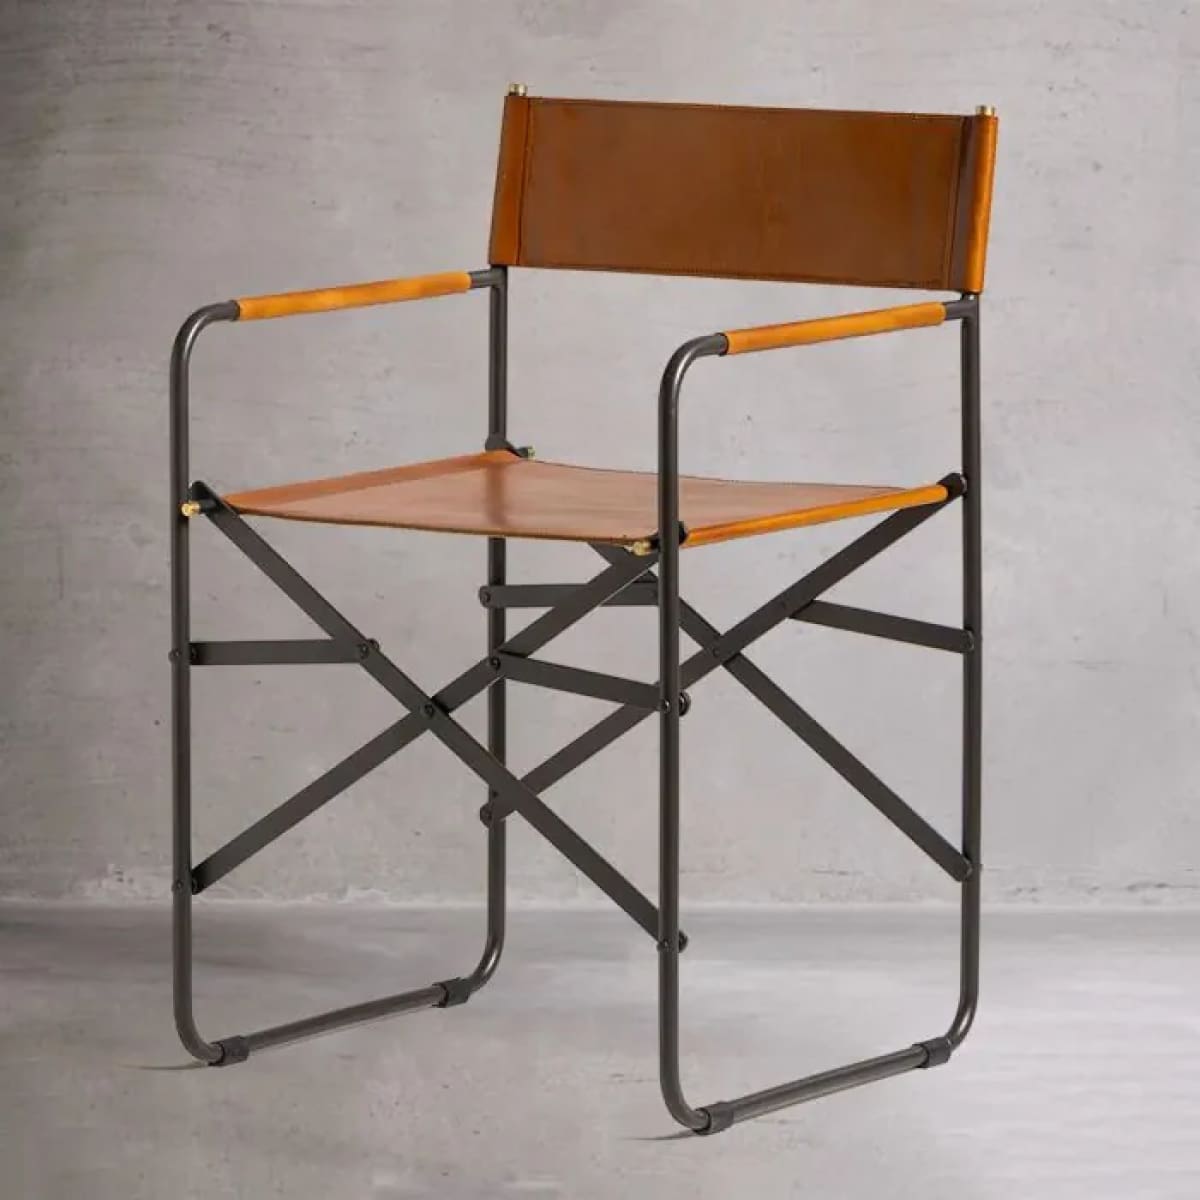 Sicily Dining Chair | Black Metal & Tan Leather - dining-chairs